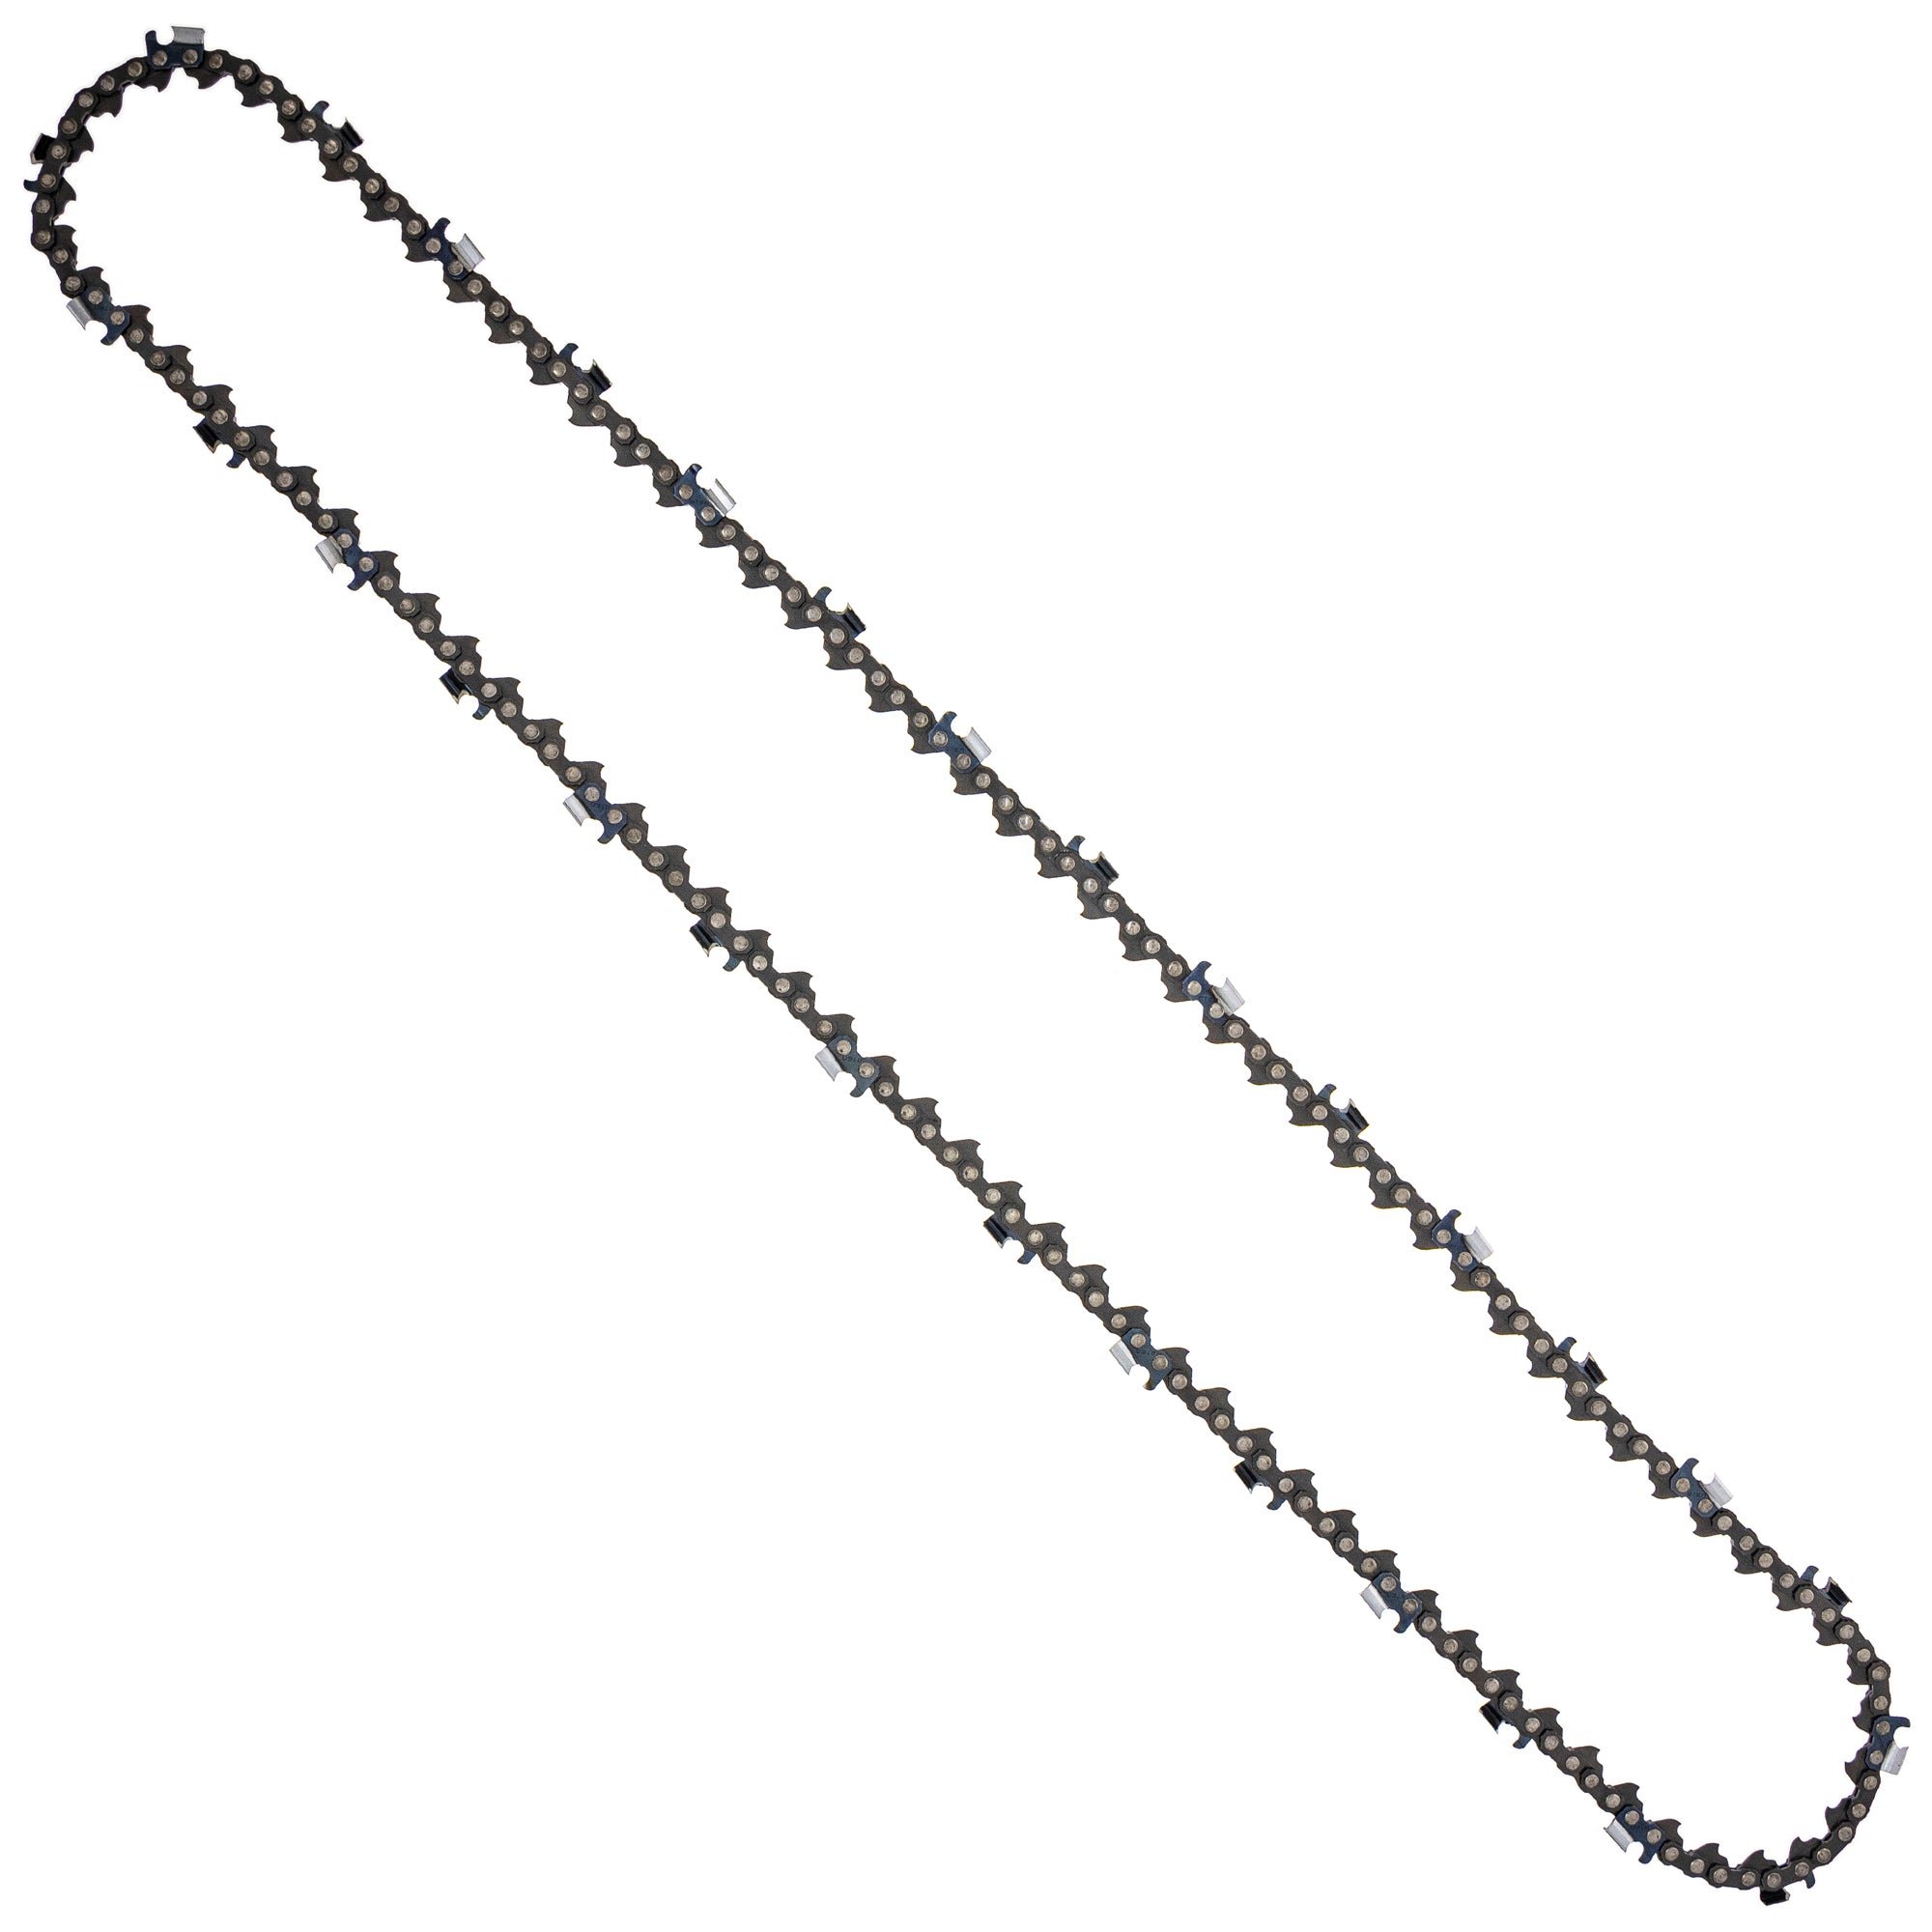 8TEN 810-CCC2430H Chain 3-Pack for zOTHER Oregon MS 066 064 056